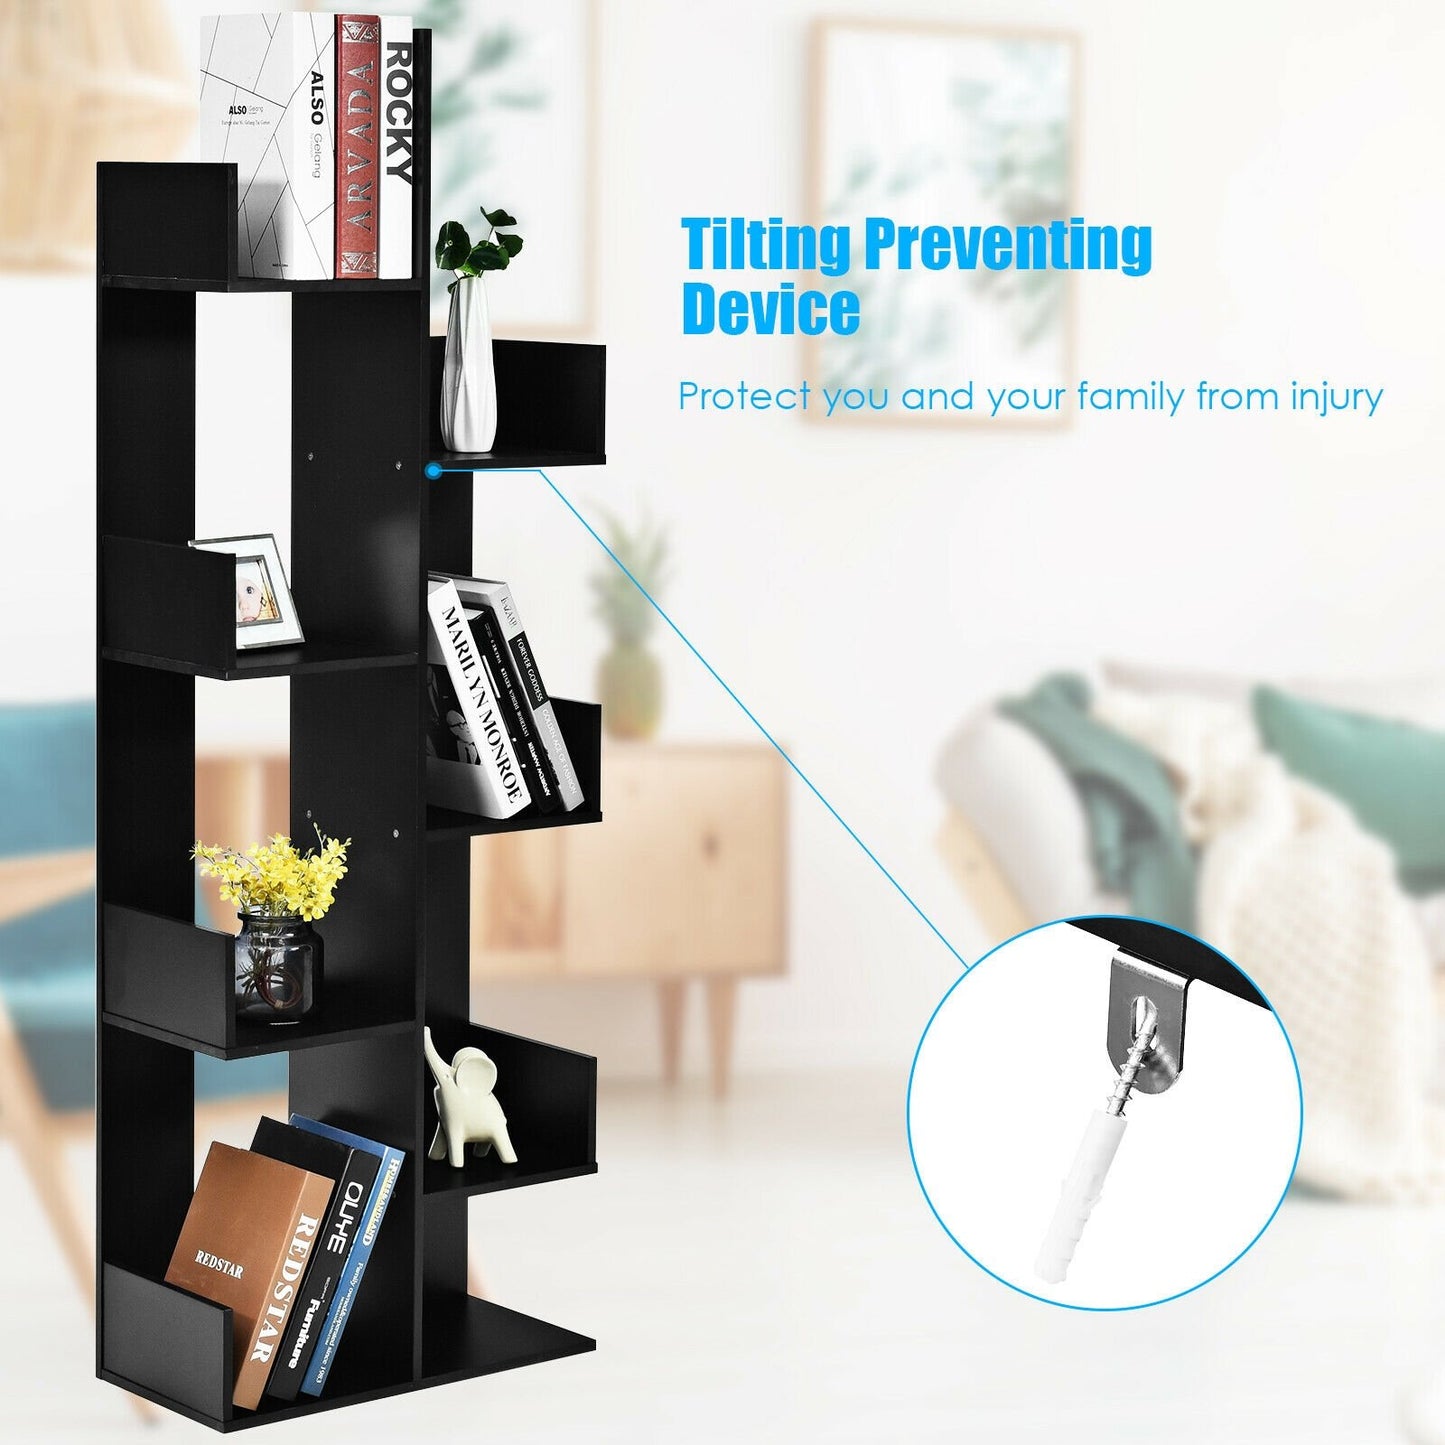 8-Tier Bookshelf Bookcase with 8 Open Compartments Space-Saving Storage Rack , Black